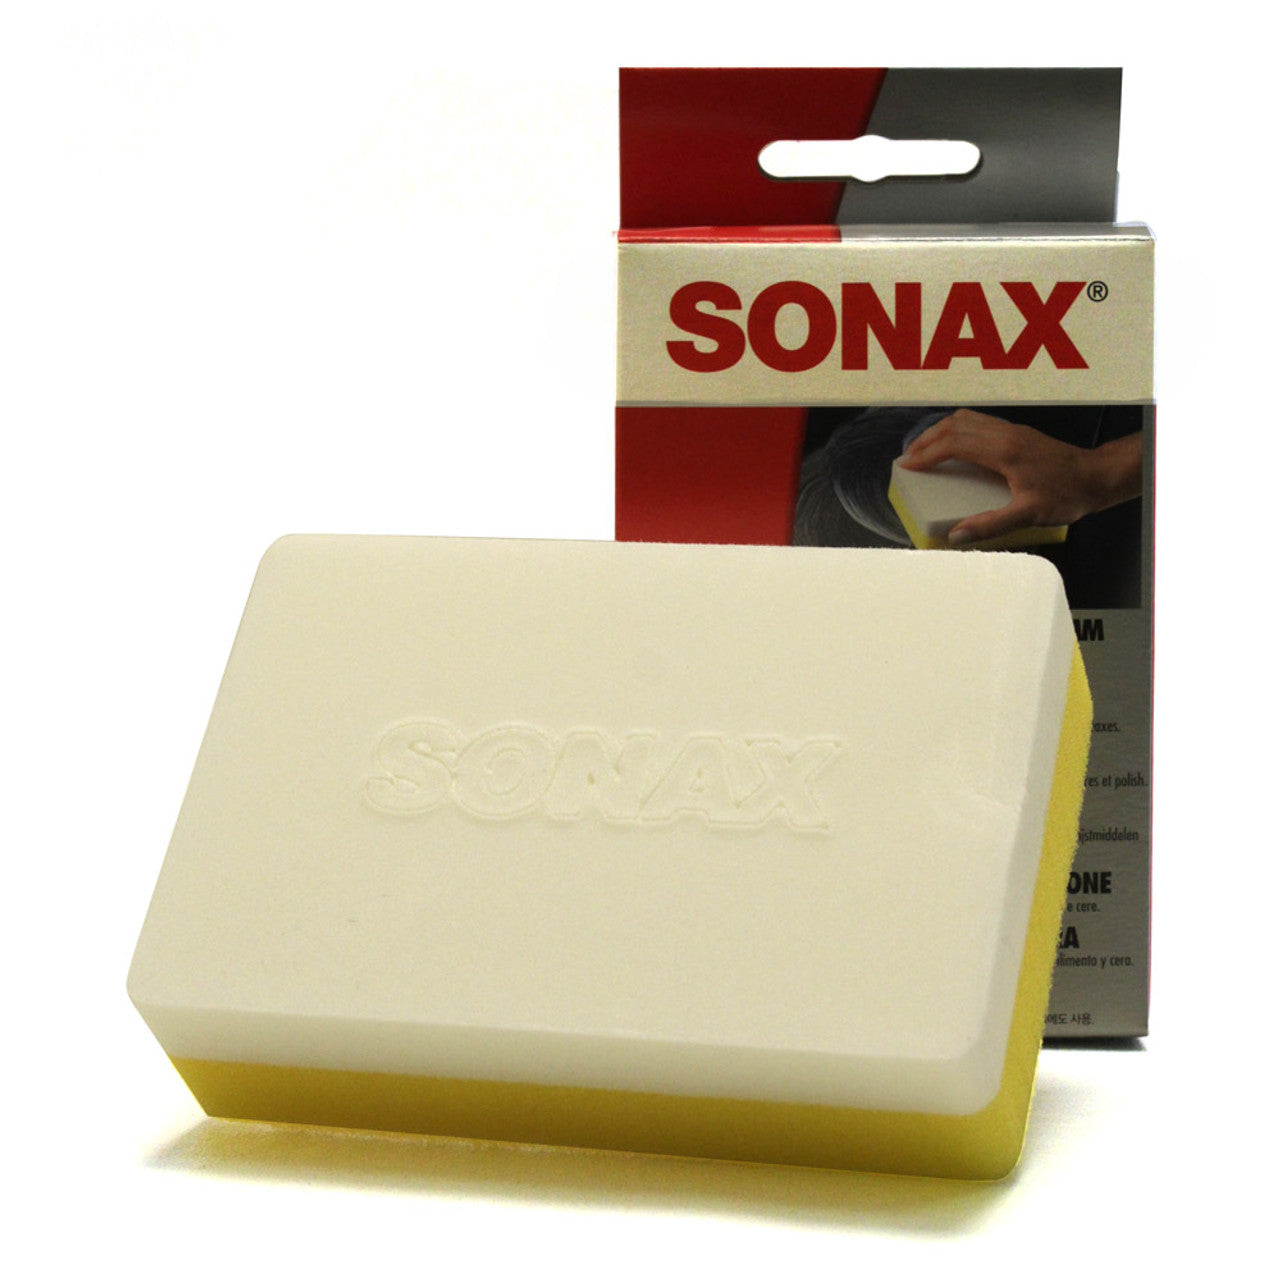 Sonax Application Sponge - Sierra Madre Collection